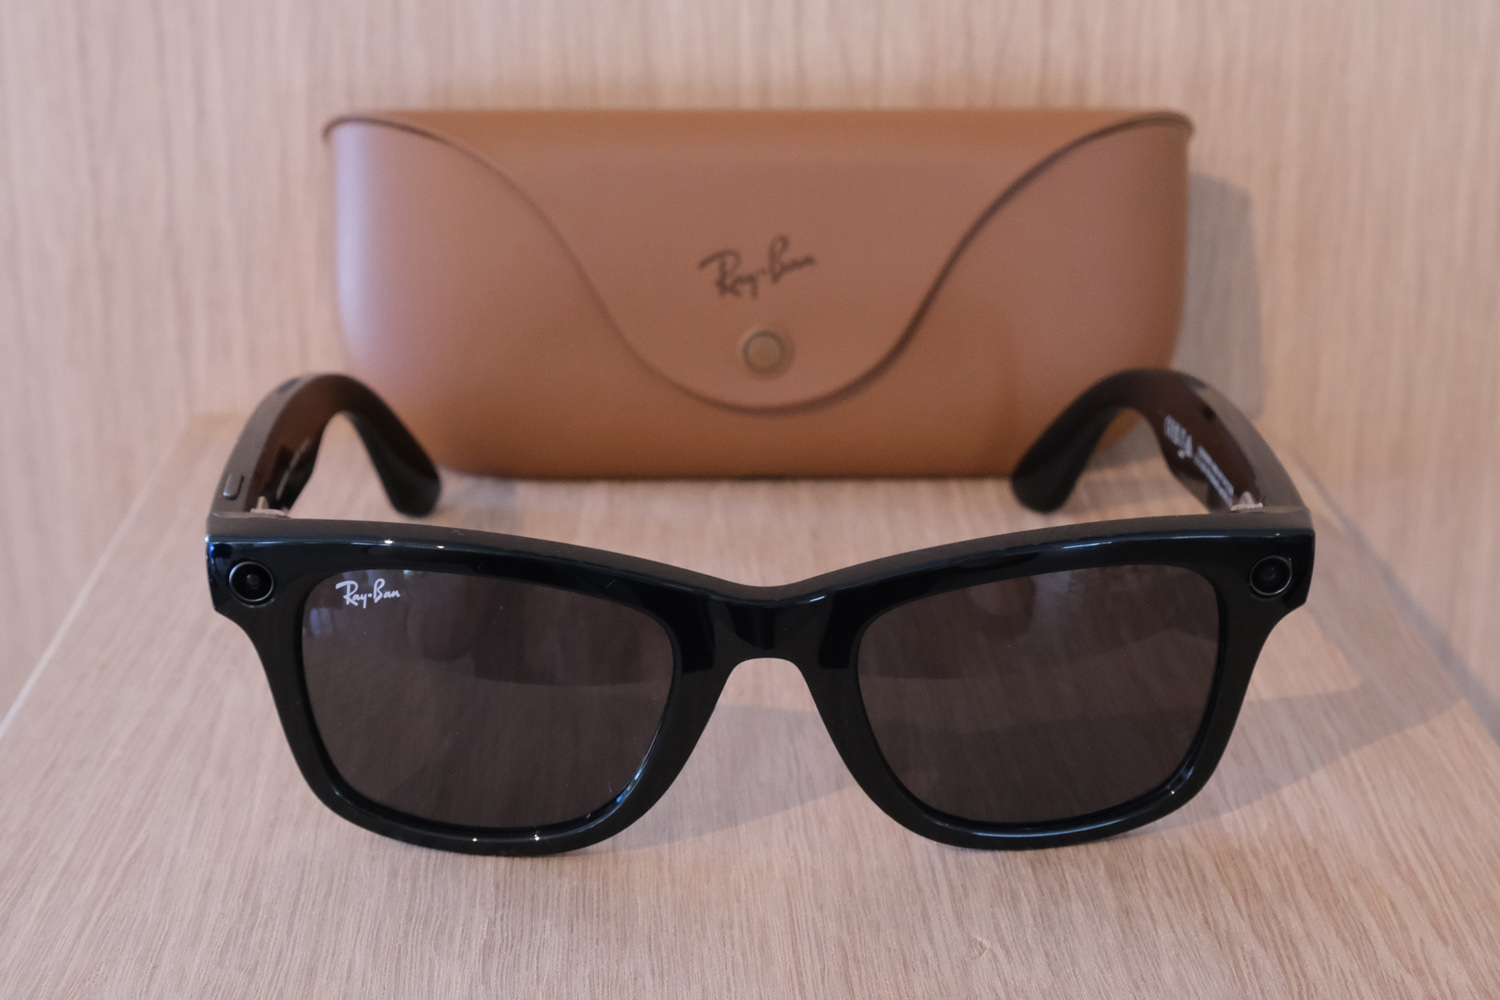 Ray-Bans Stories: Facebook's glasses aren't as scary as you think, yet